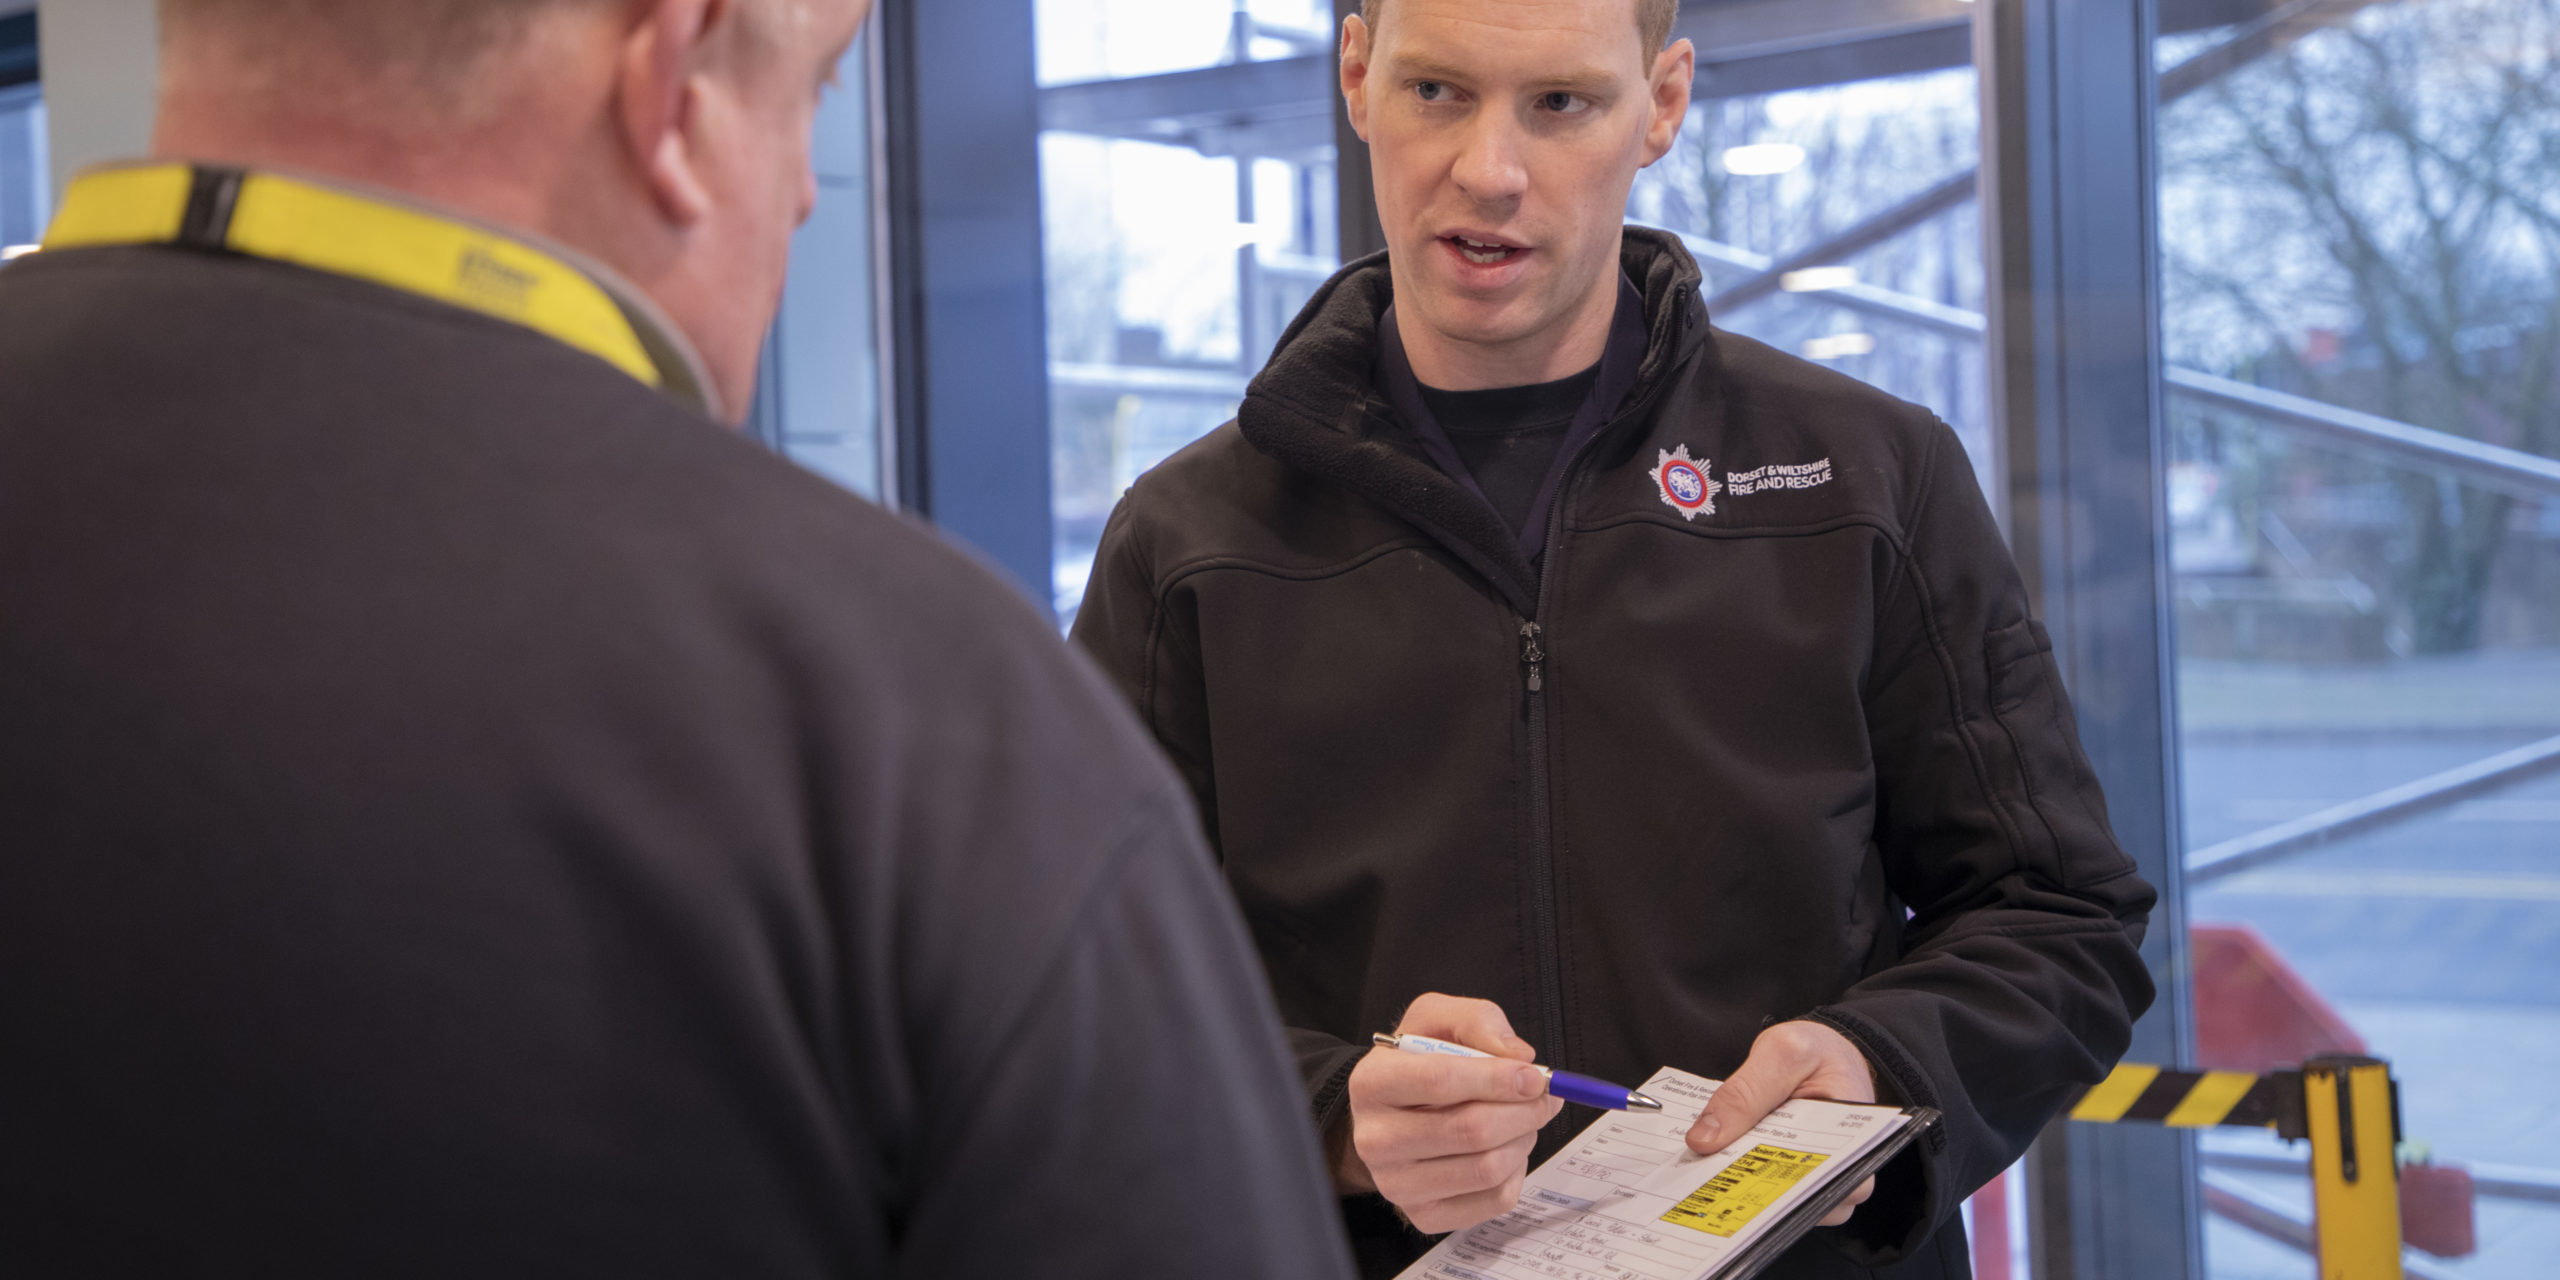 Member of Fire Safety Team talking to a business owner